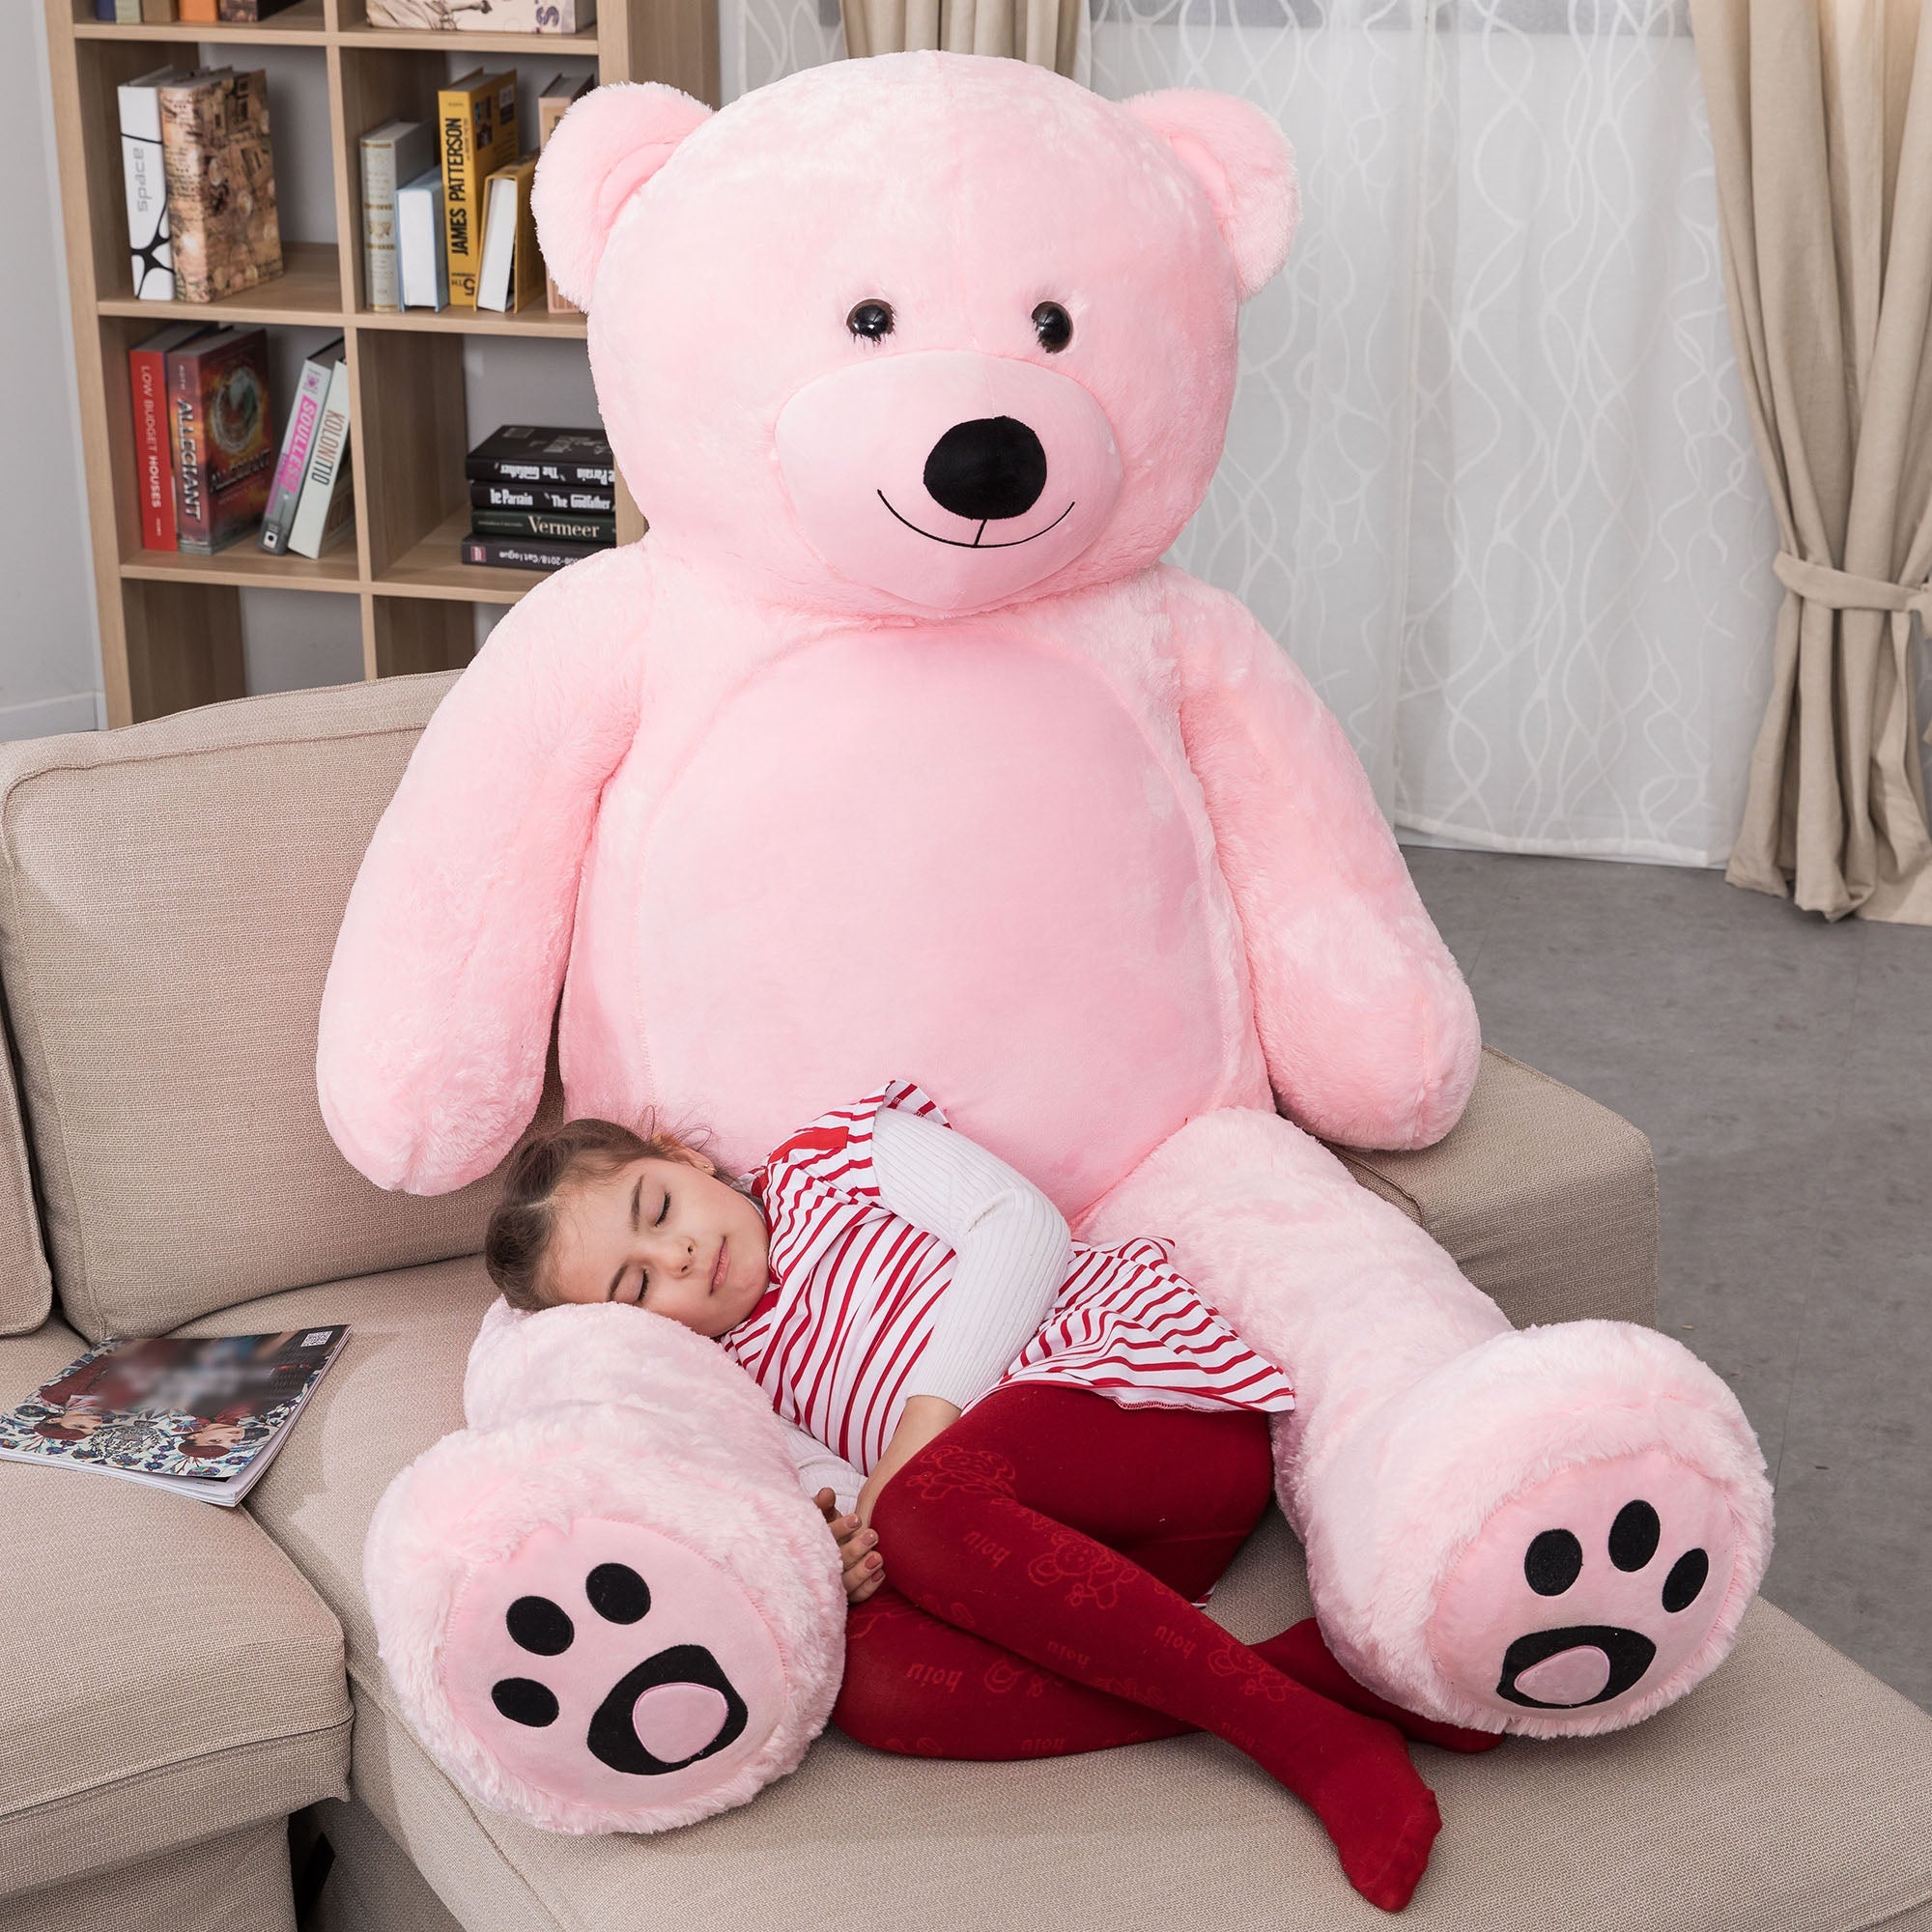 6 Foot Giant Huge Life Size Teddy Bear Daneey 72 Inches